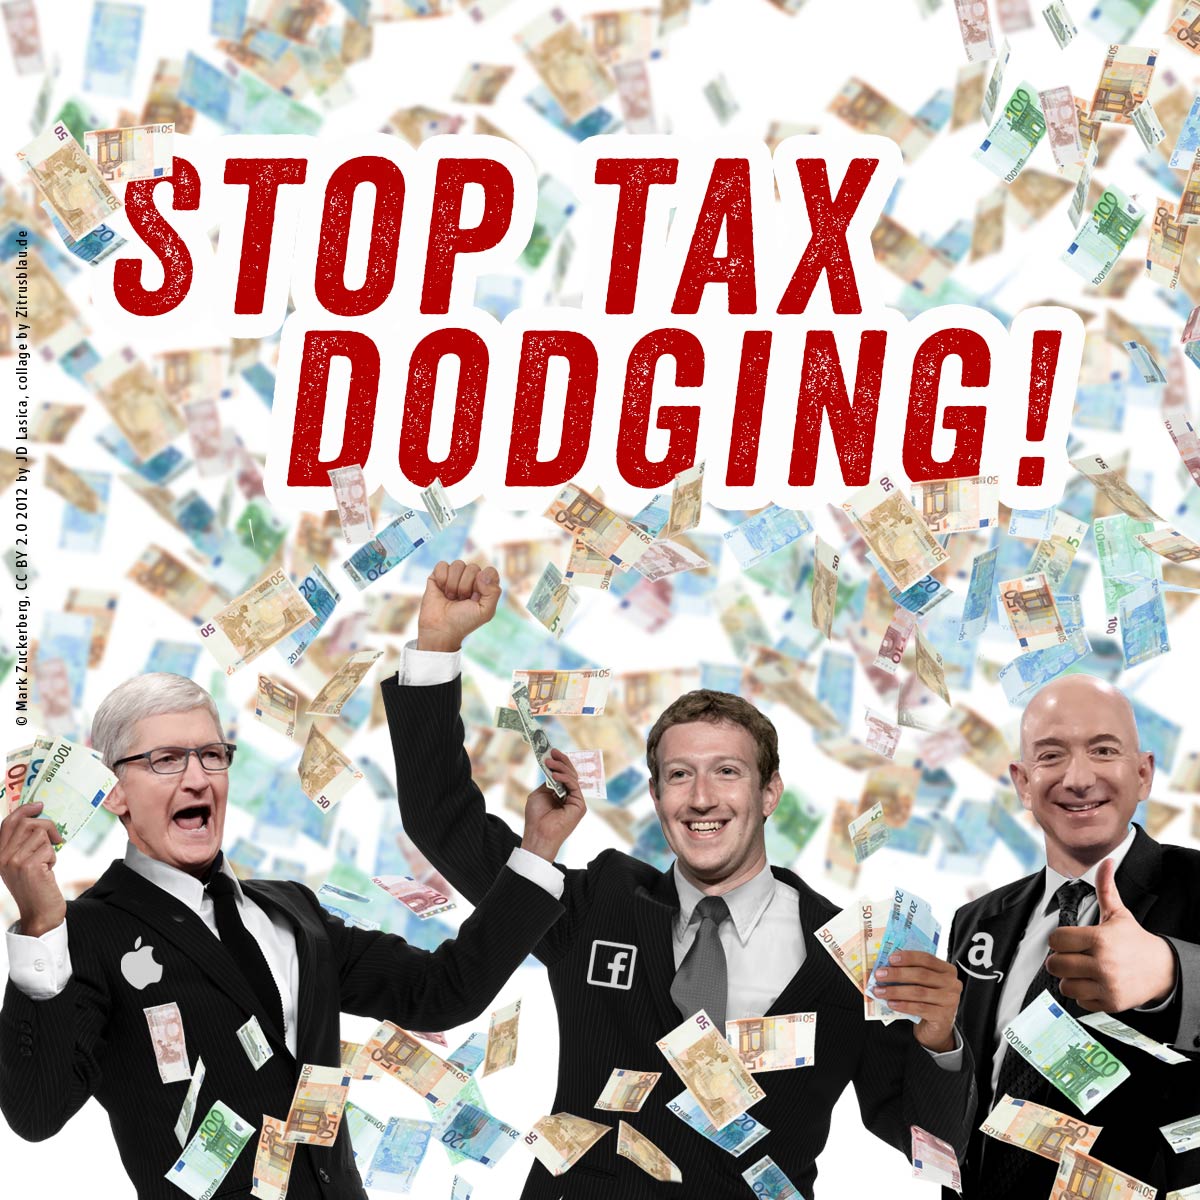 [Petition] Take action to stop corporate tax dodging